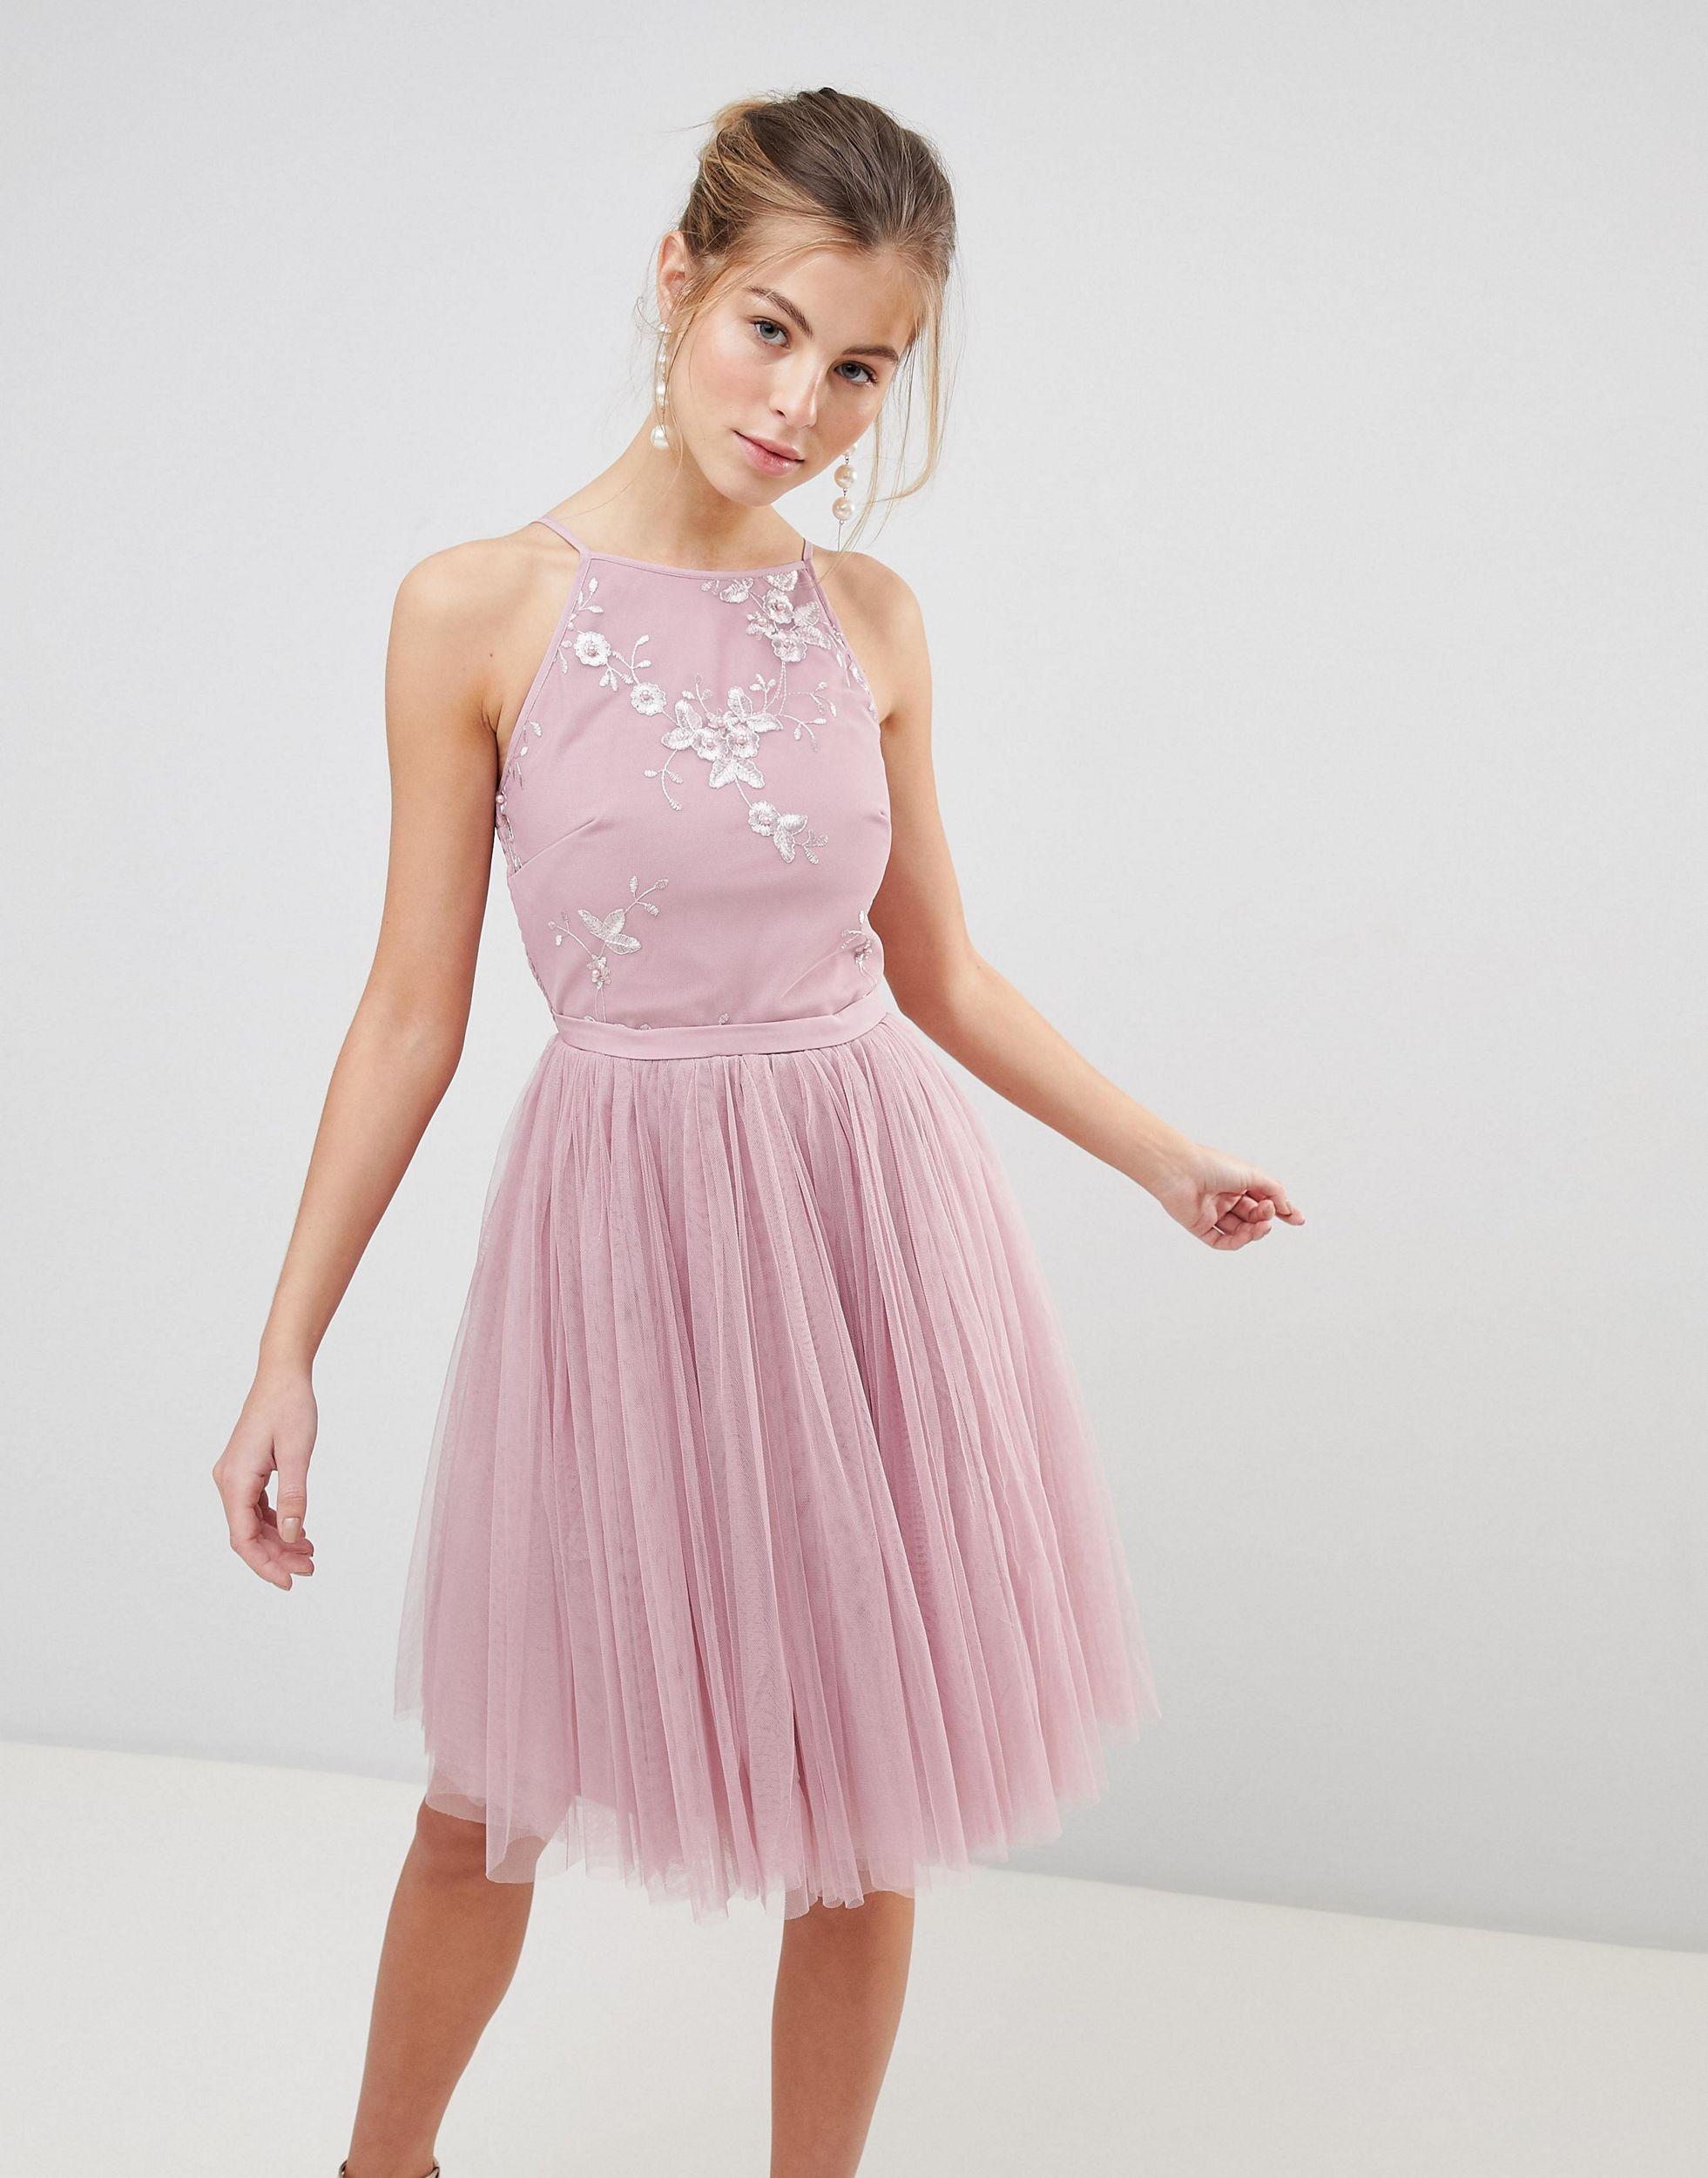 Jupe Patineuse Tulle Best Online, 61% OFF | asrehazir.com